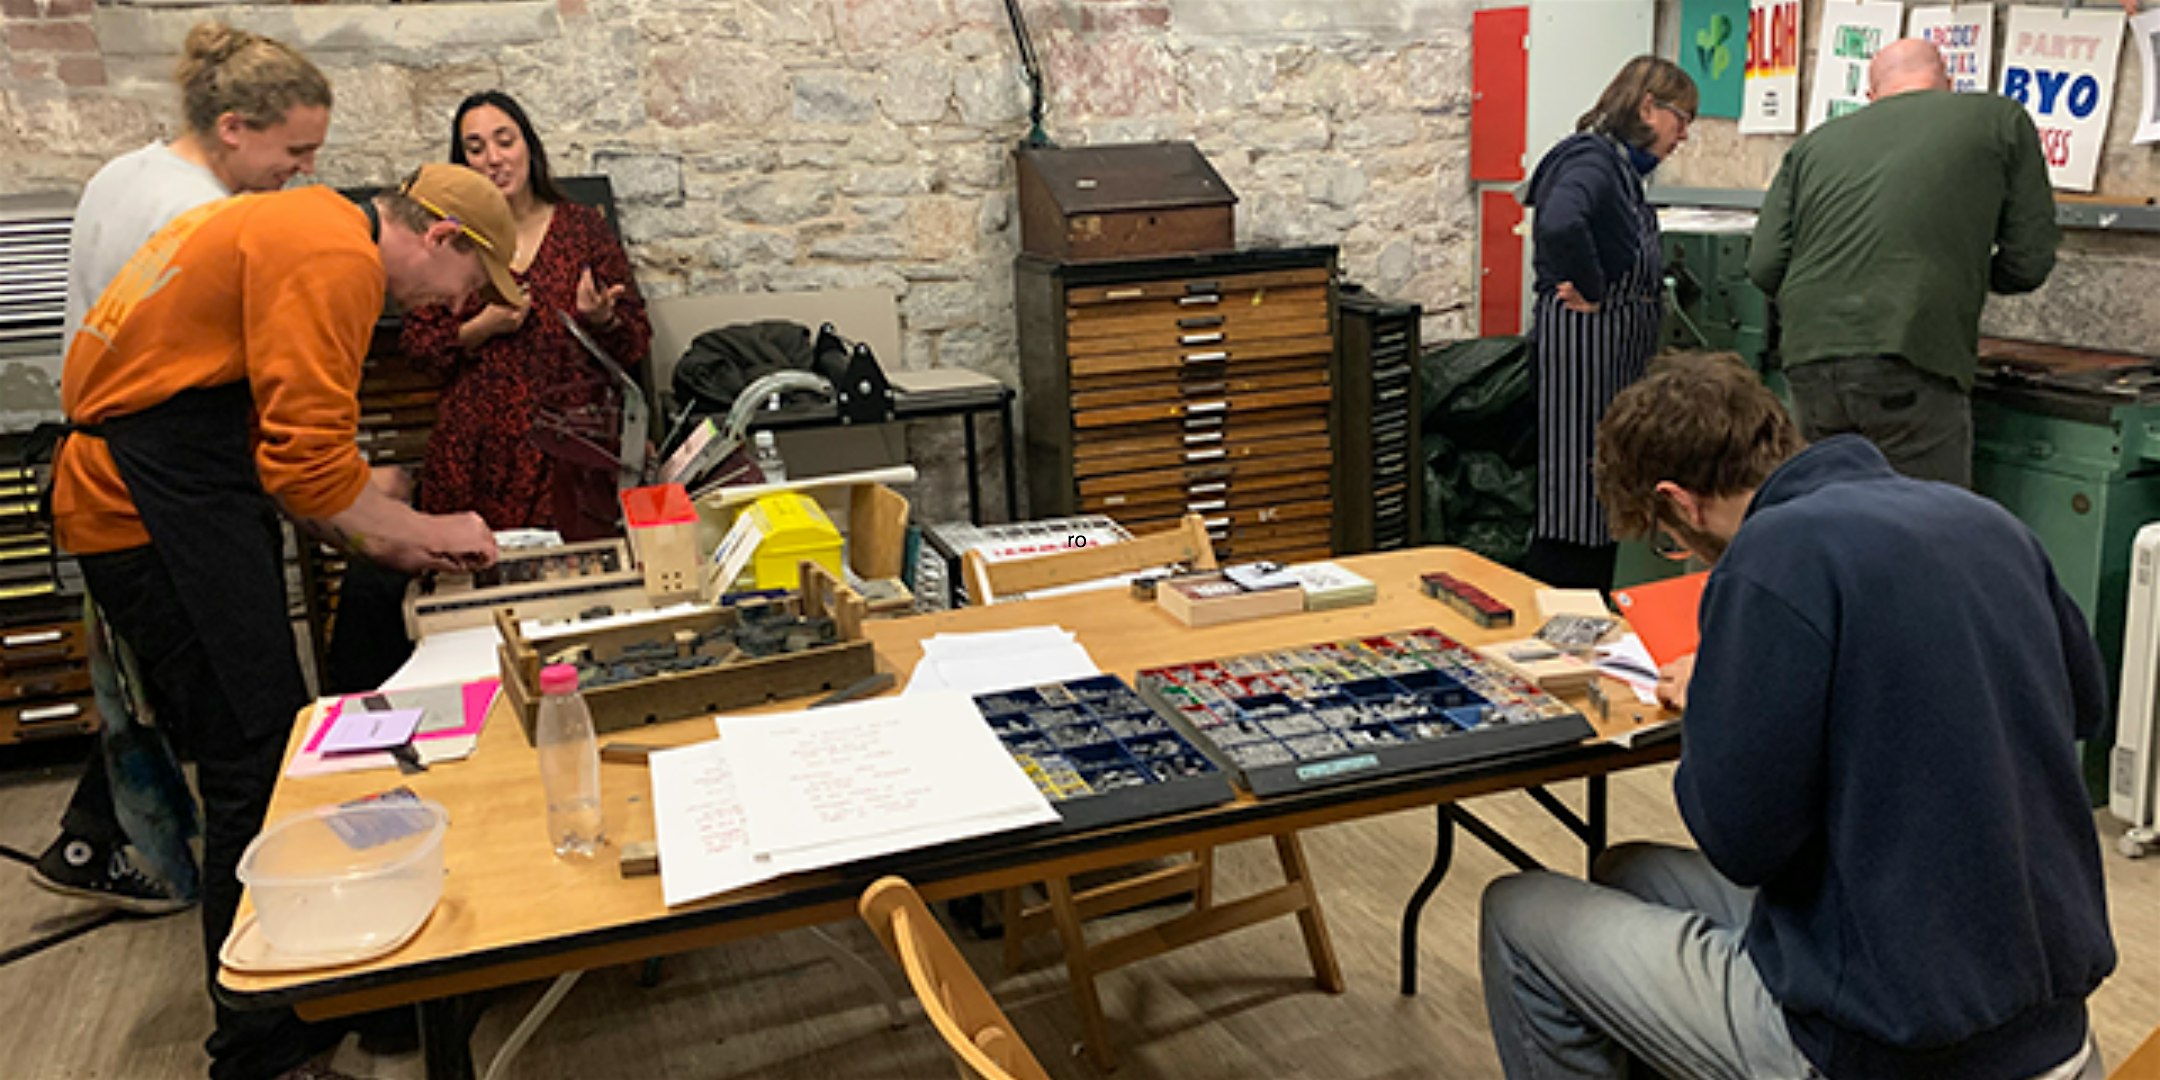 INTRODUCTION TO LETTERPRESS PRINTING